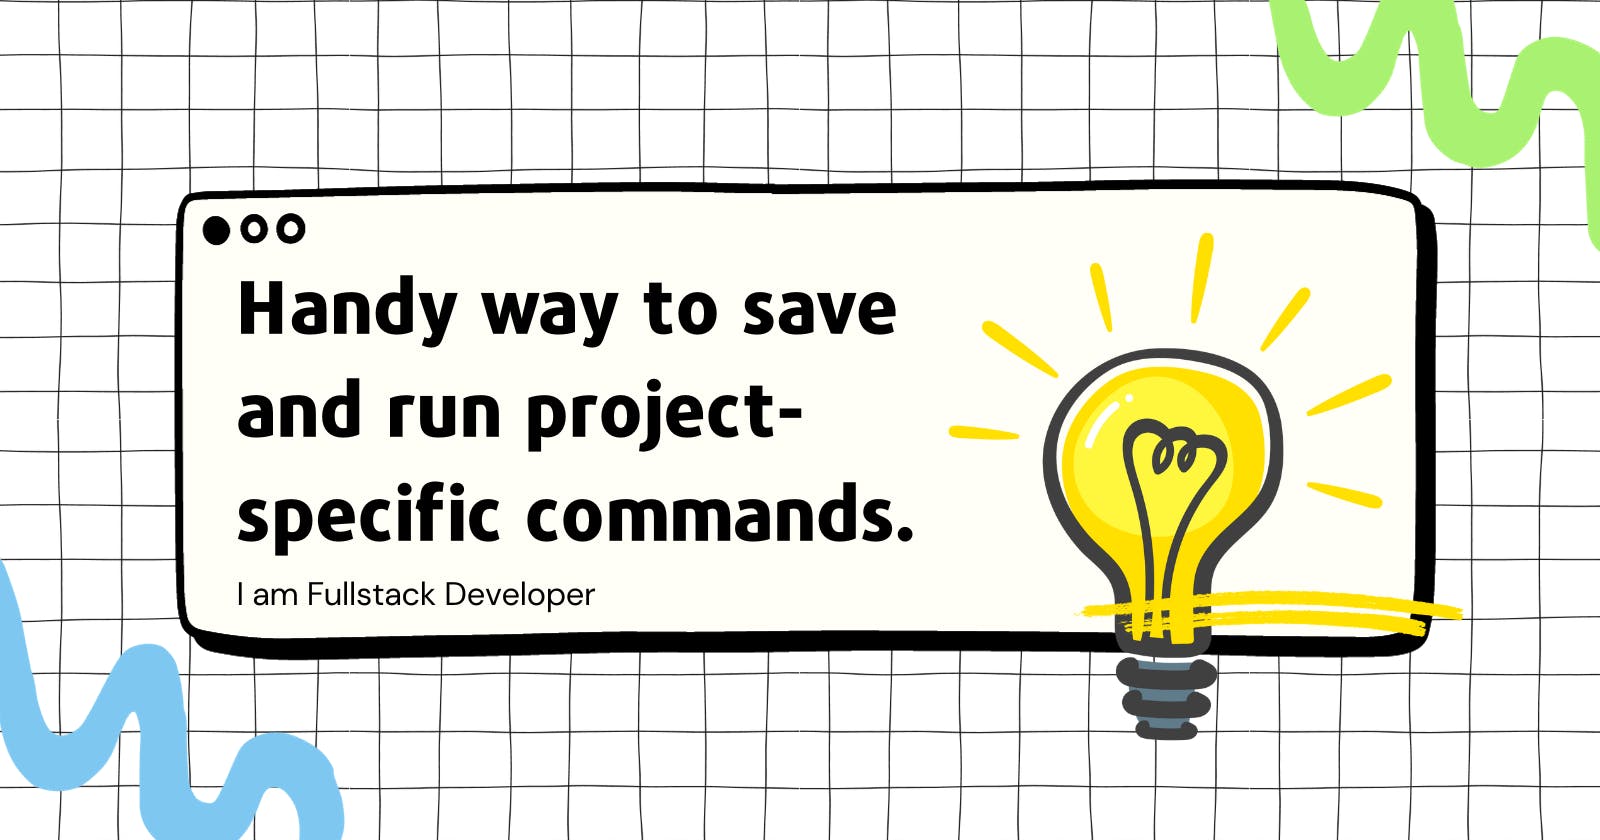 Handy way to save and run project-specific commands.